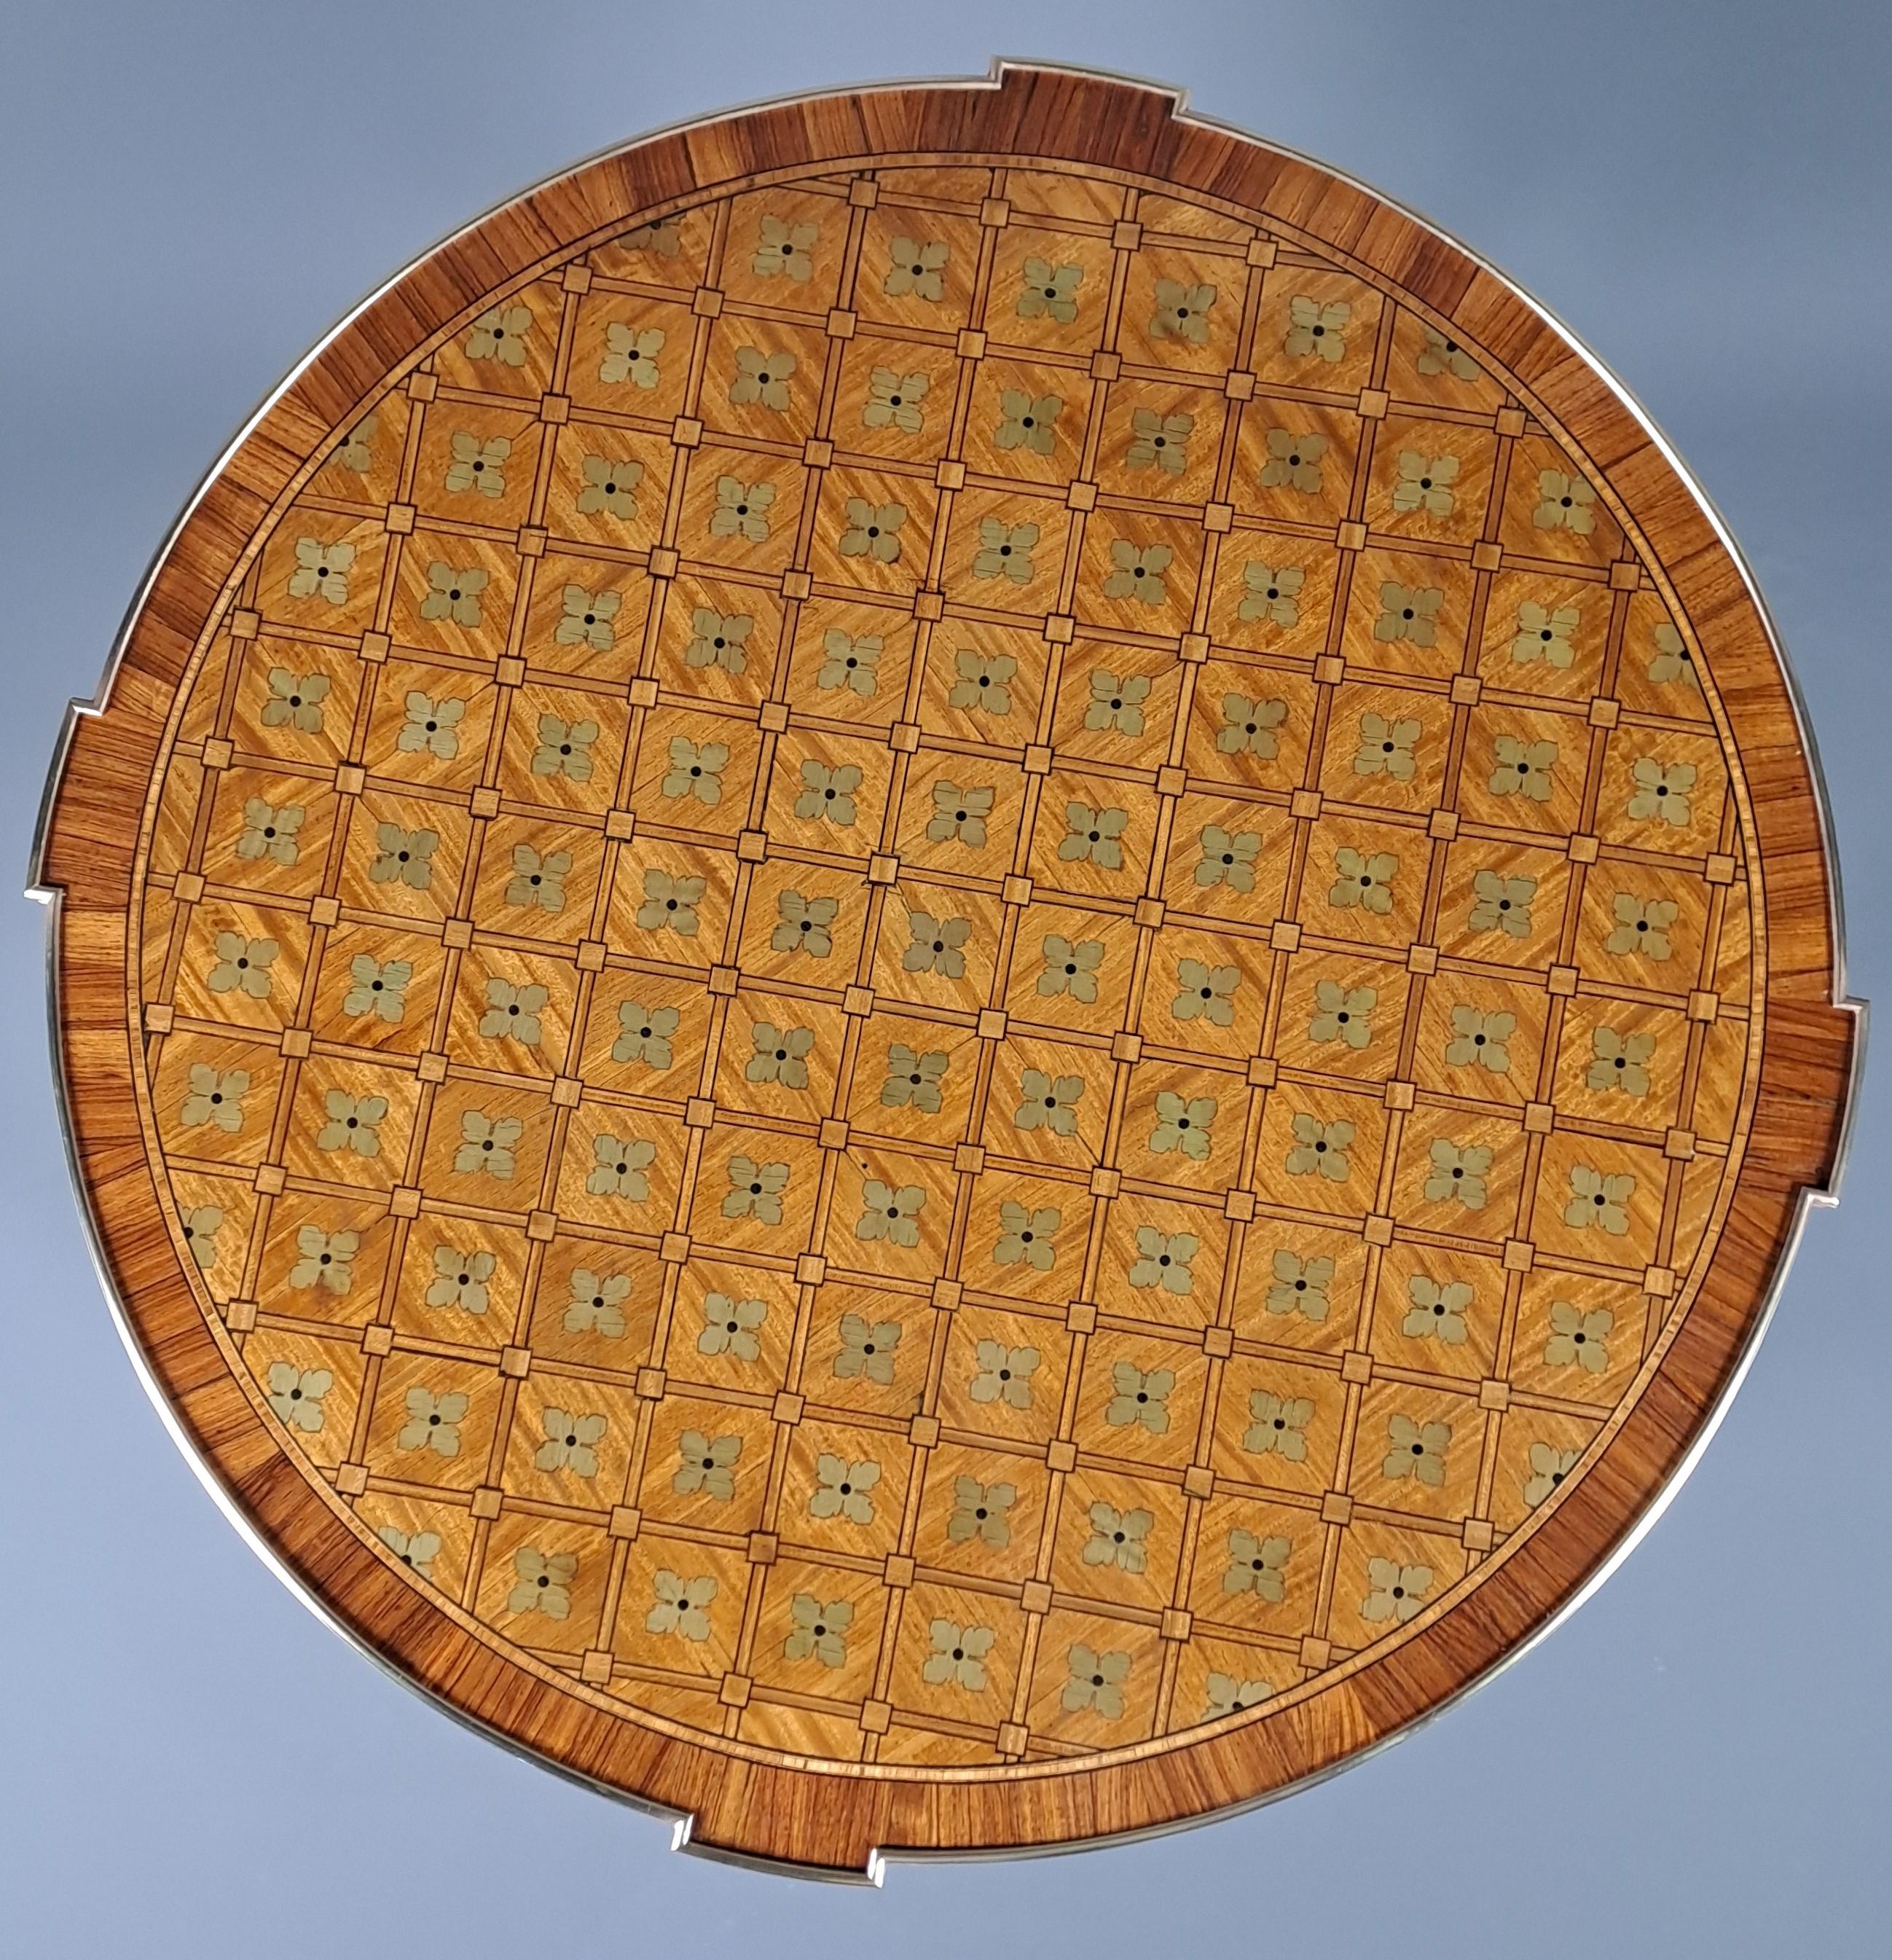 Very elegant Louis XVI style pedestal table with inlaid decoration of quartefeuilles presented in checkerboards on the top and in rings on the belt.

Note the projections up to the plateau directly above the four sheathed legs.

Opening a belt